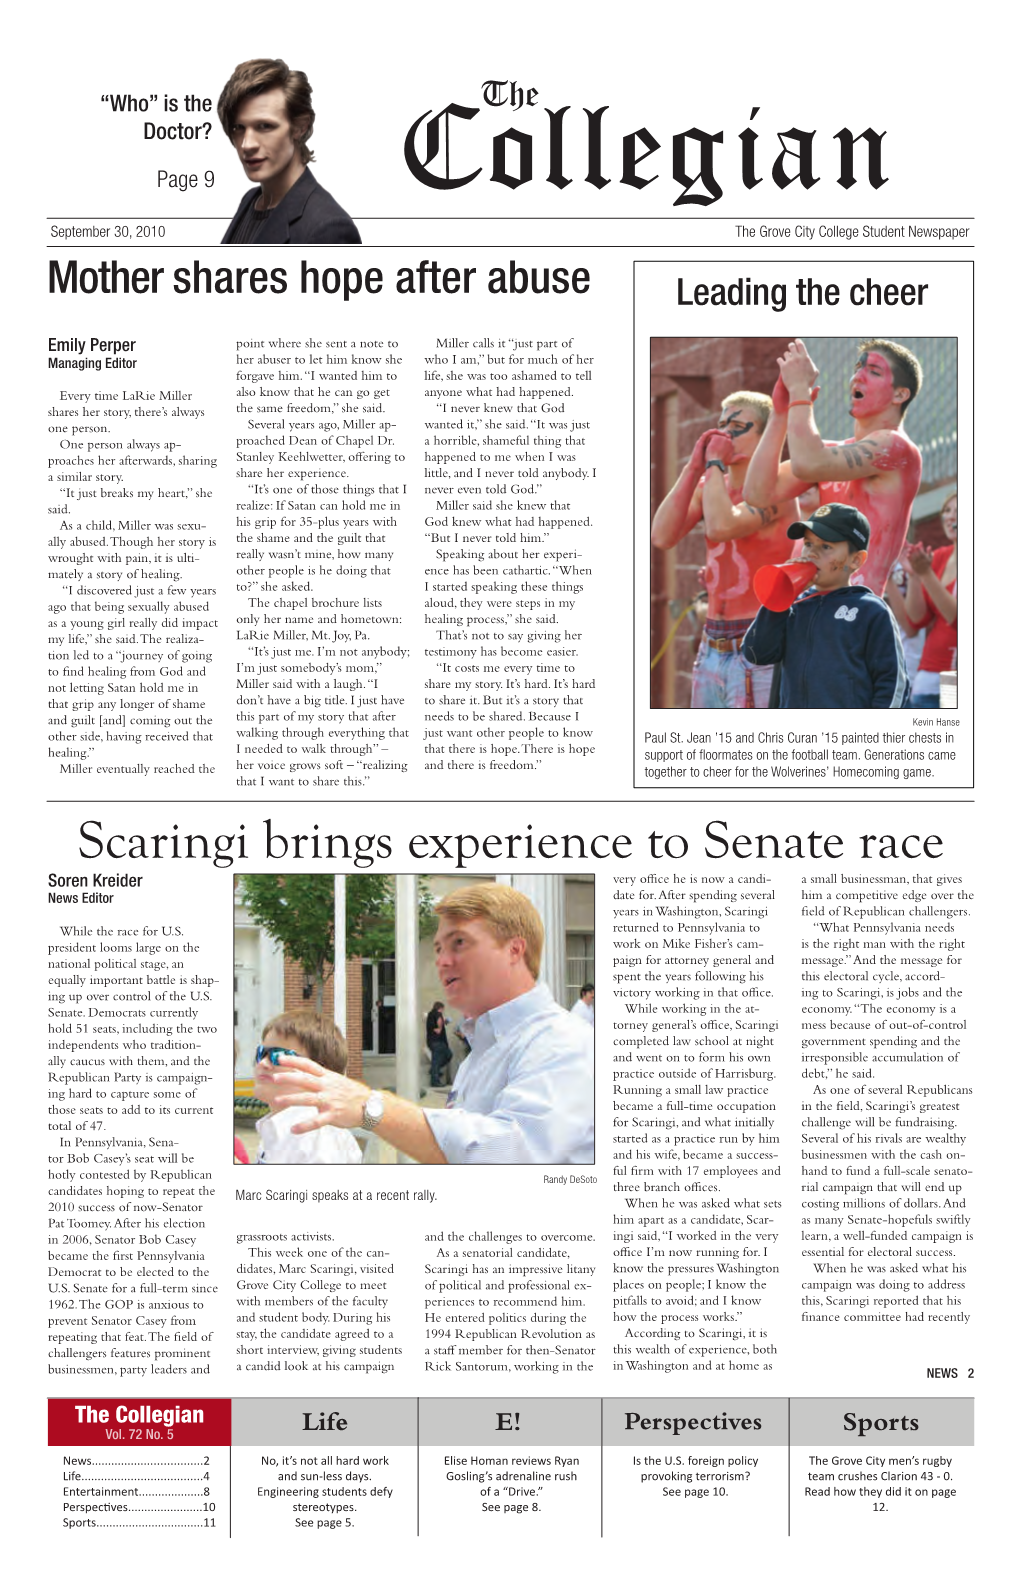 Scaringi Brings Experience to Senate Race Soren Kreider Very Office He Is Now a Candi- a Small Businessman, That Gives News Editor Date For